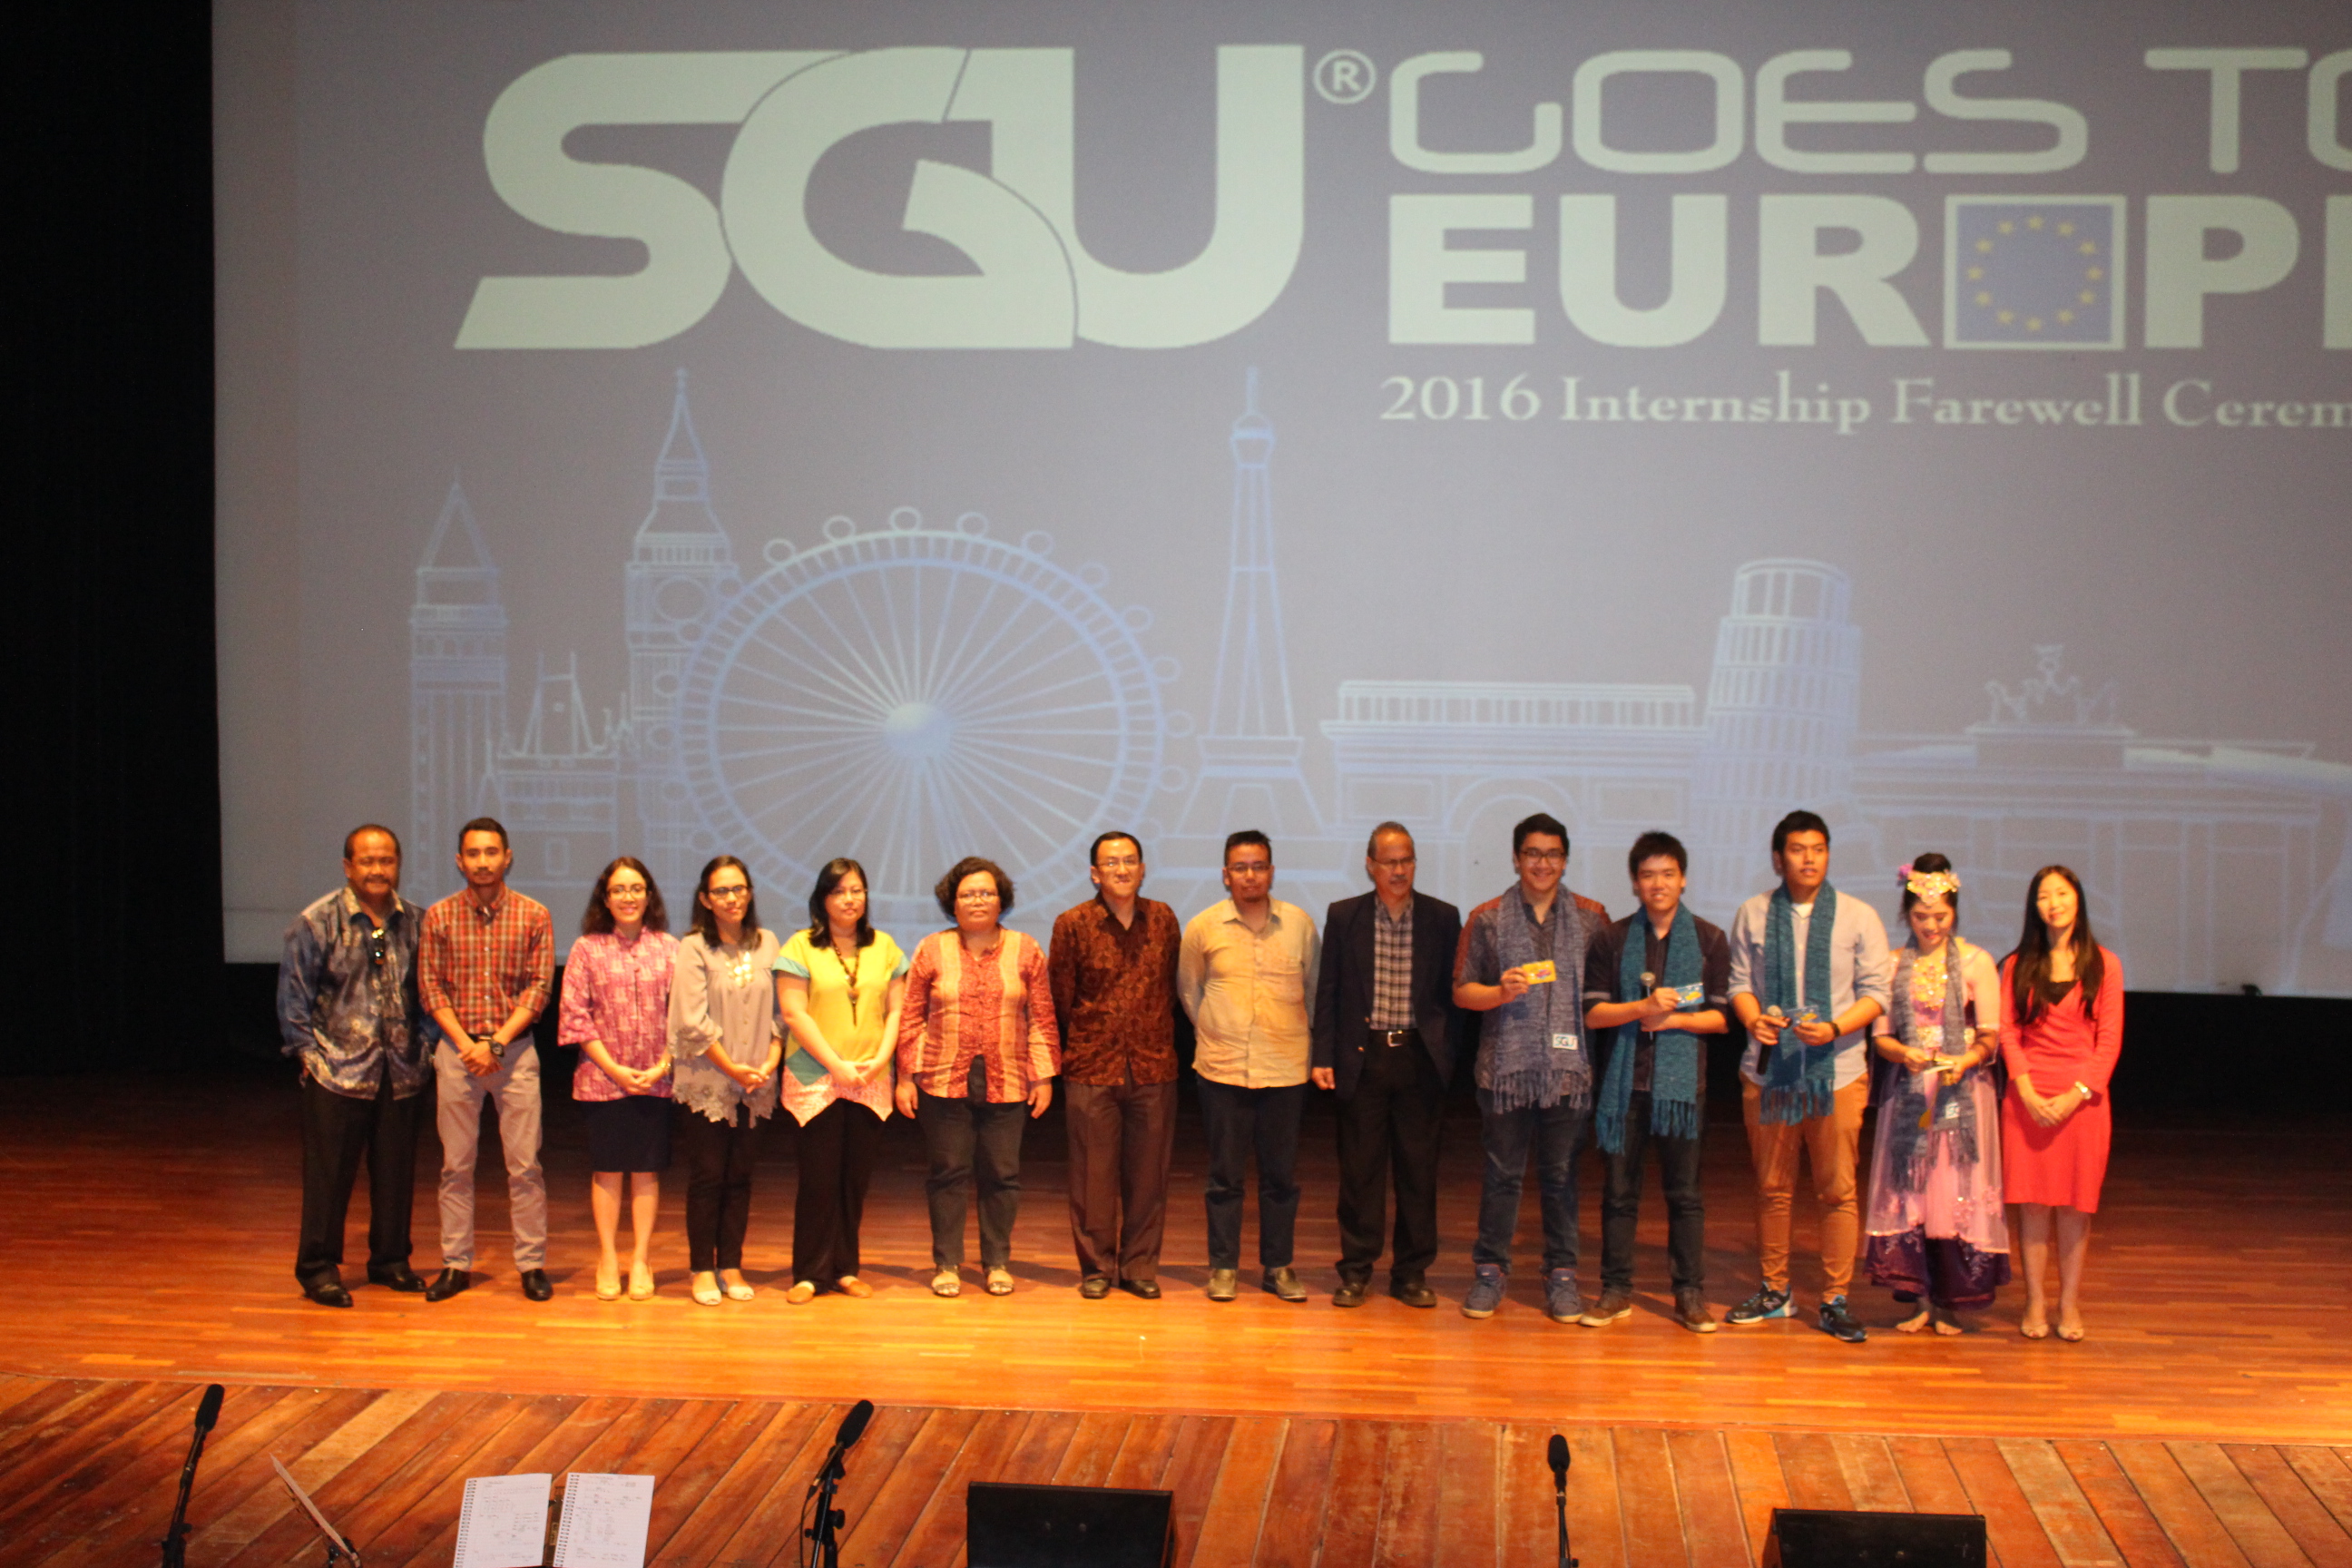 SGU Goes to Europe, a Ceremony bidding Farewell to Semester 6 Students